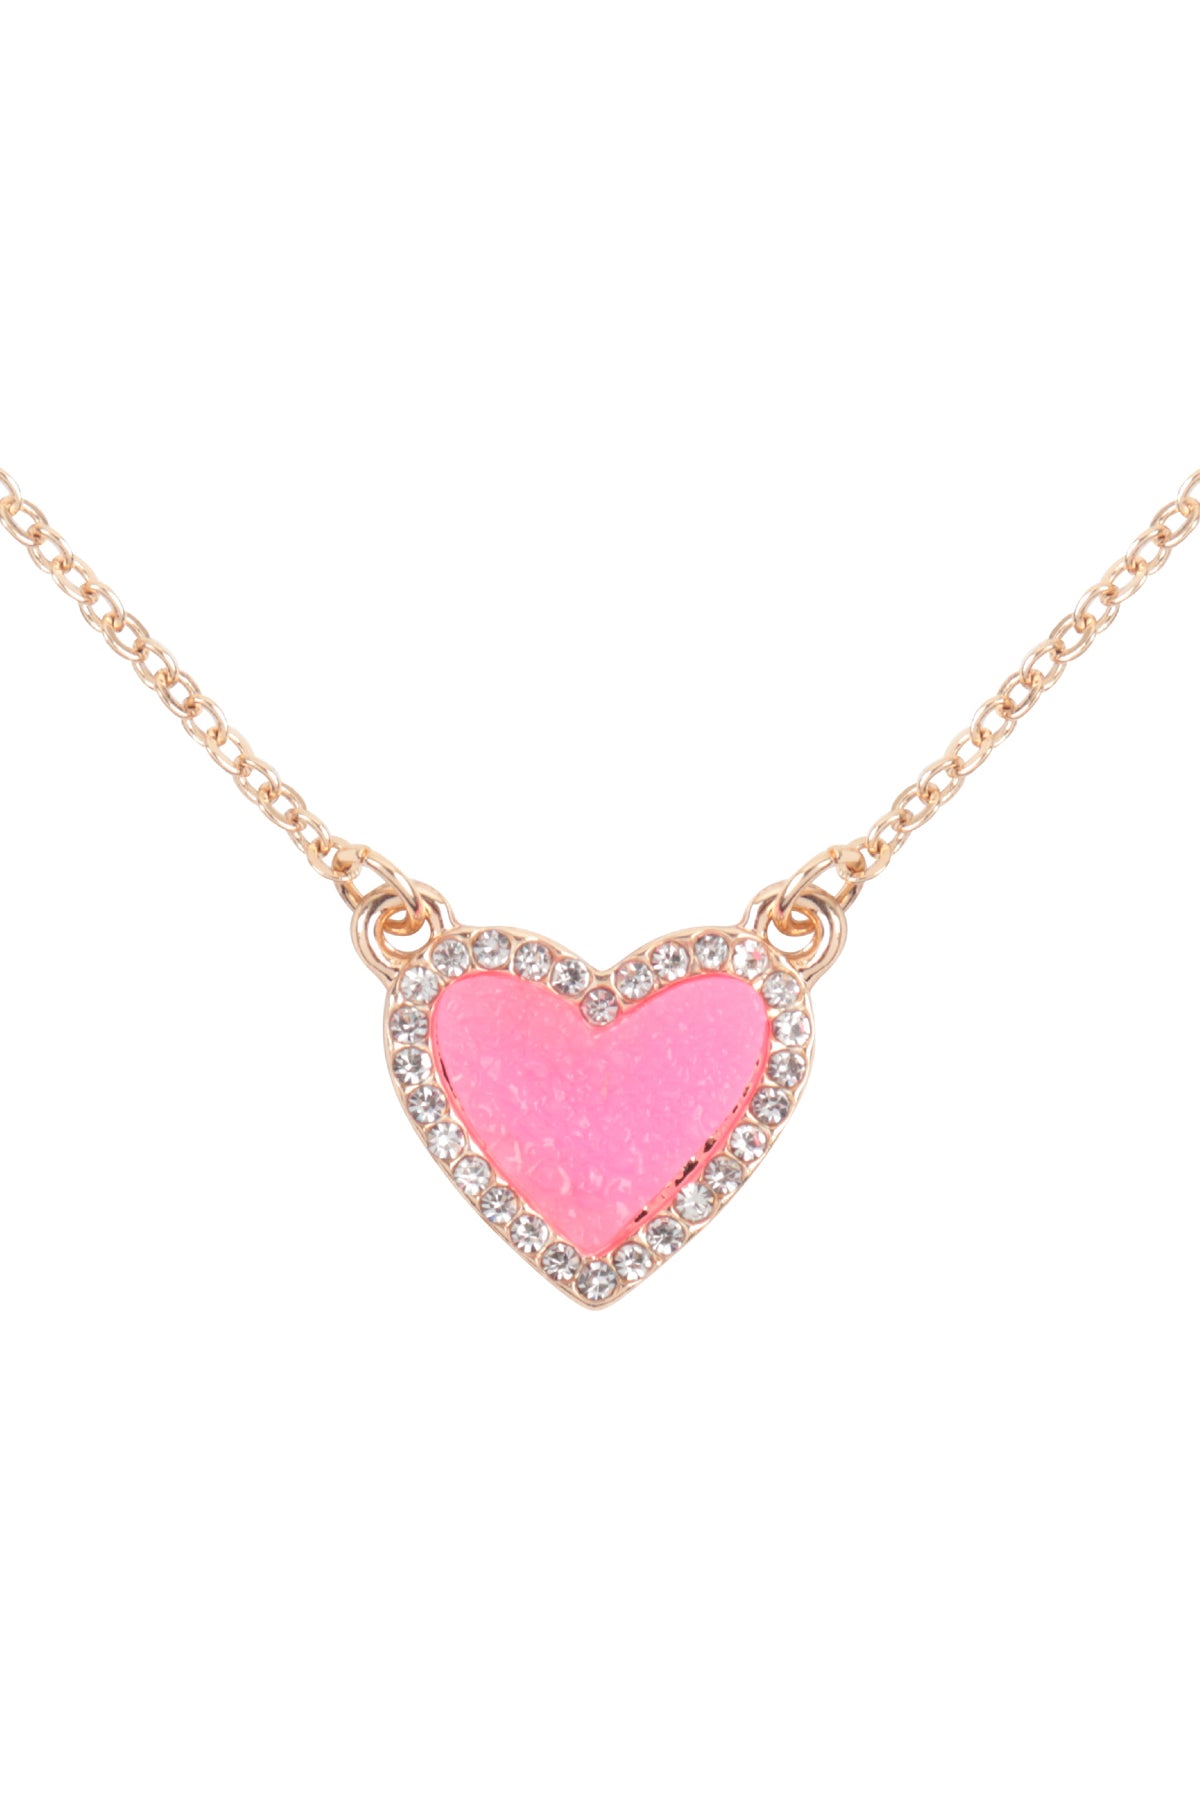 VALENTINE HEART DRUZY WITH RHINESTONE PENDANT NECKLACE AND EARRING SET